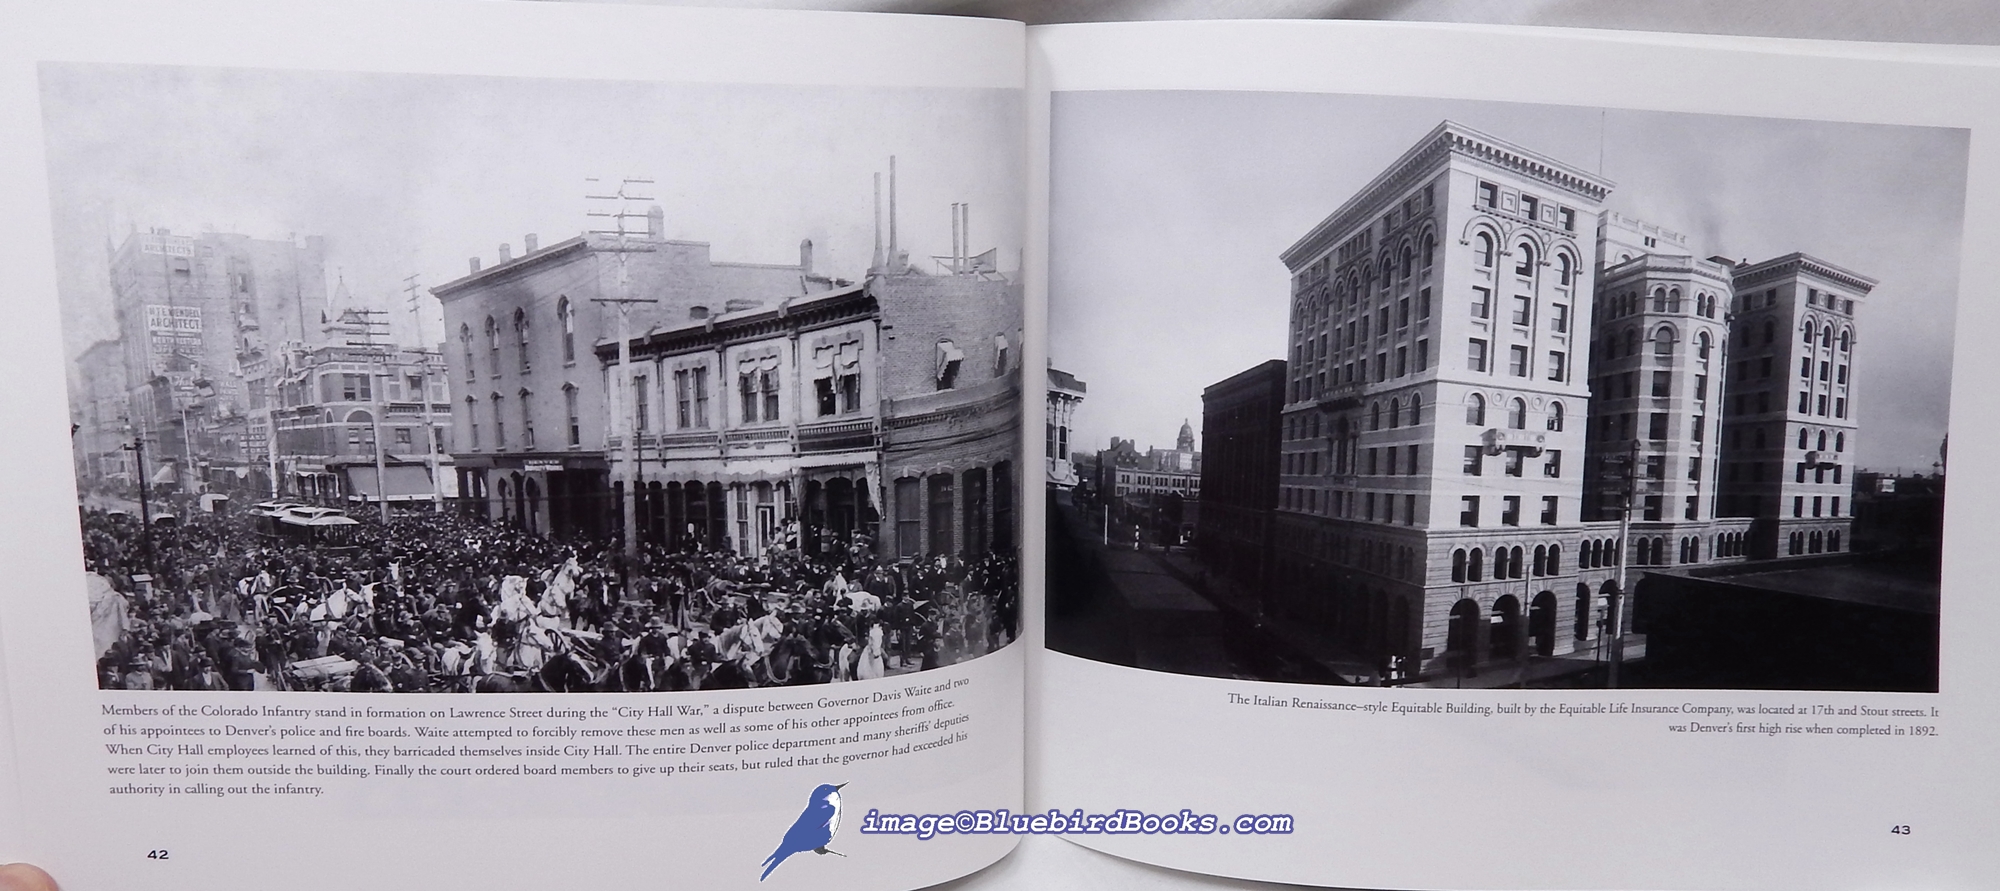 VALLIER, MYRON - Remembering Denver [Photographic History of Denver from the 1860s to the 1940s]